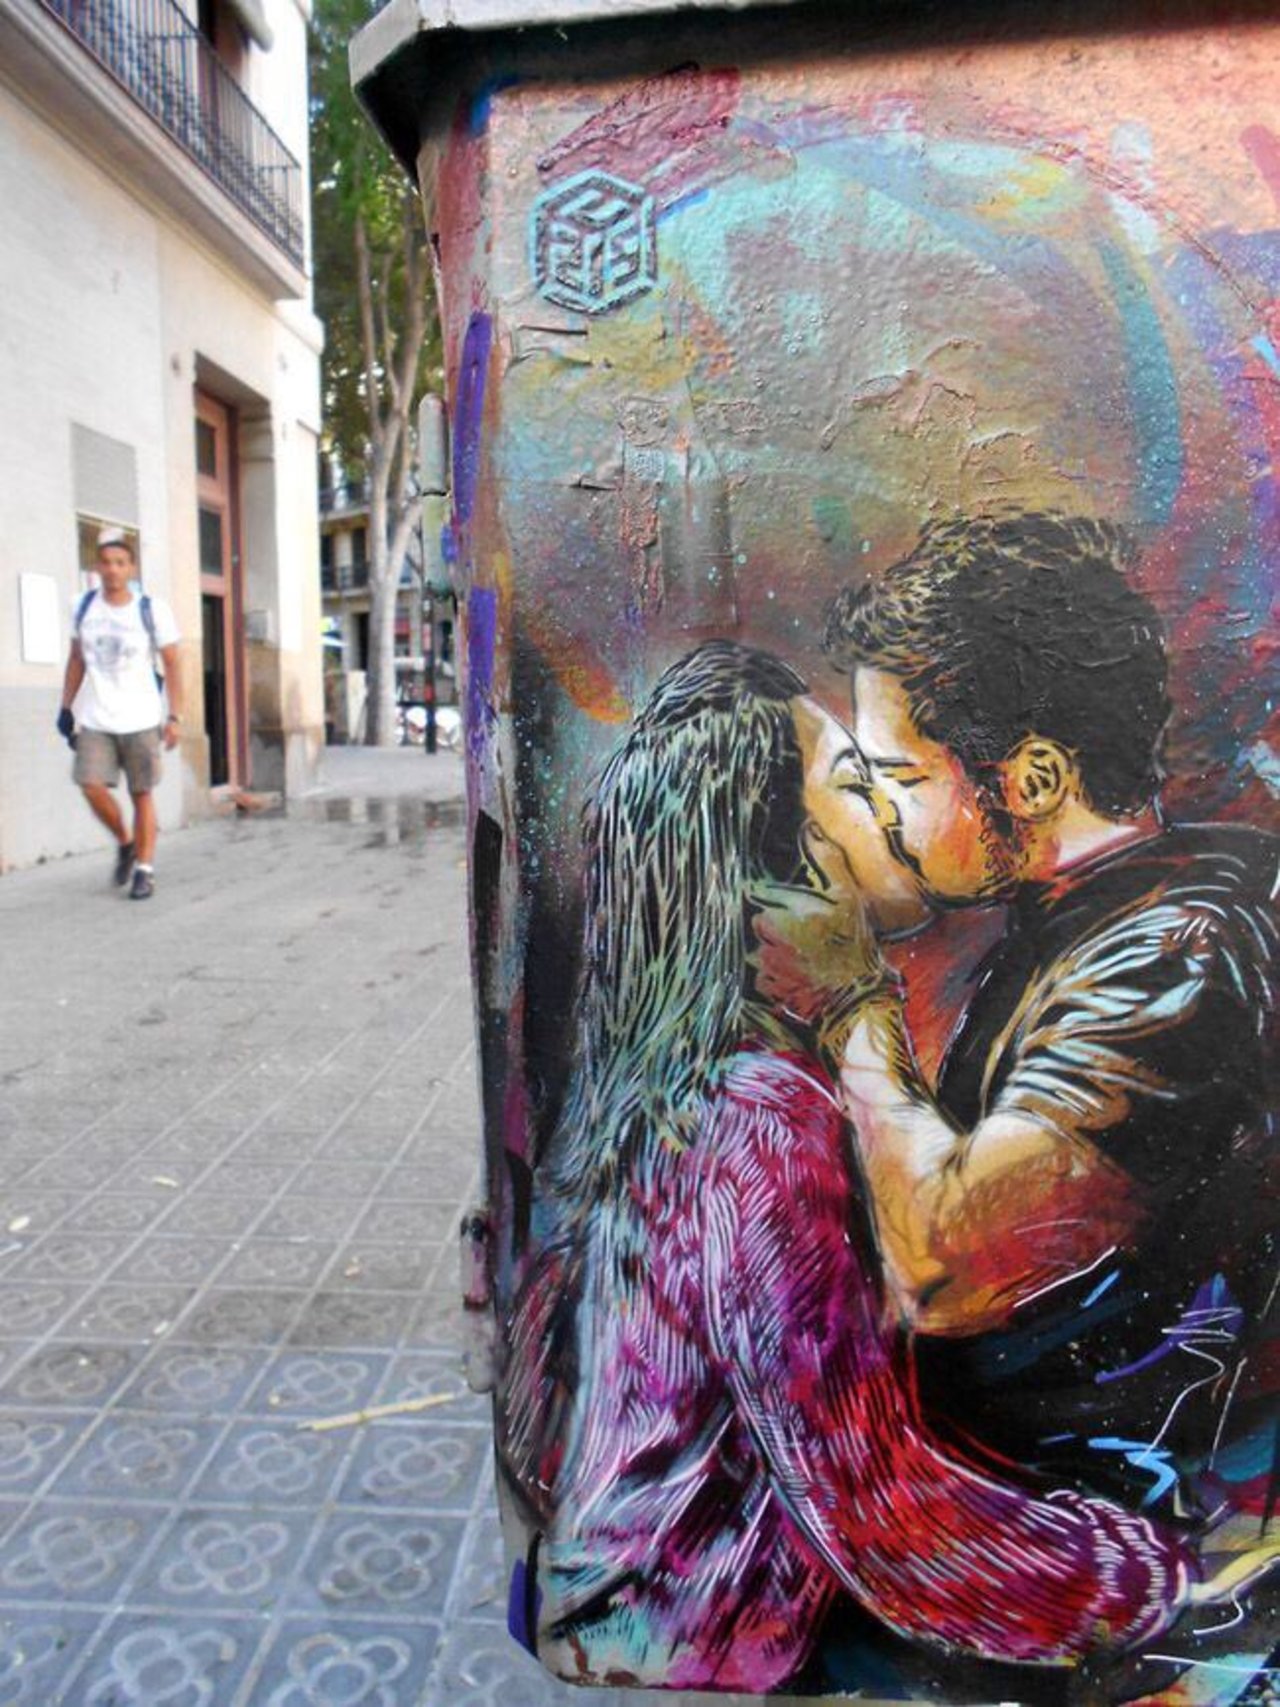 #streetart by C215 #Barcelona  Huge kiss #Artlovers Have a lovely day all of you  https://t.co/5SZRYMaupu